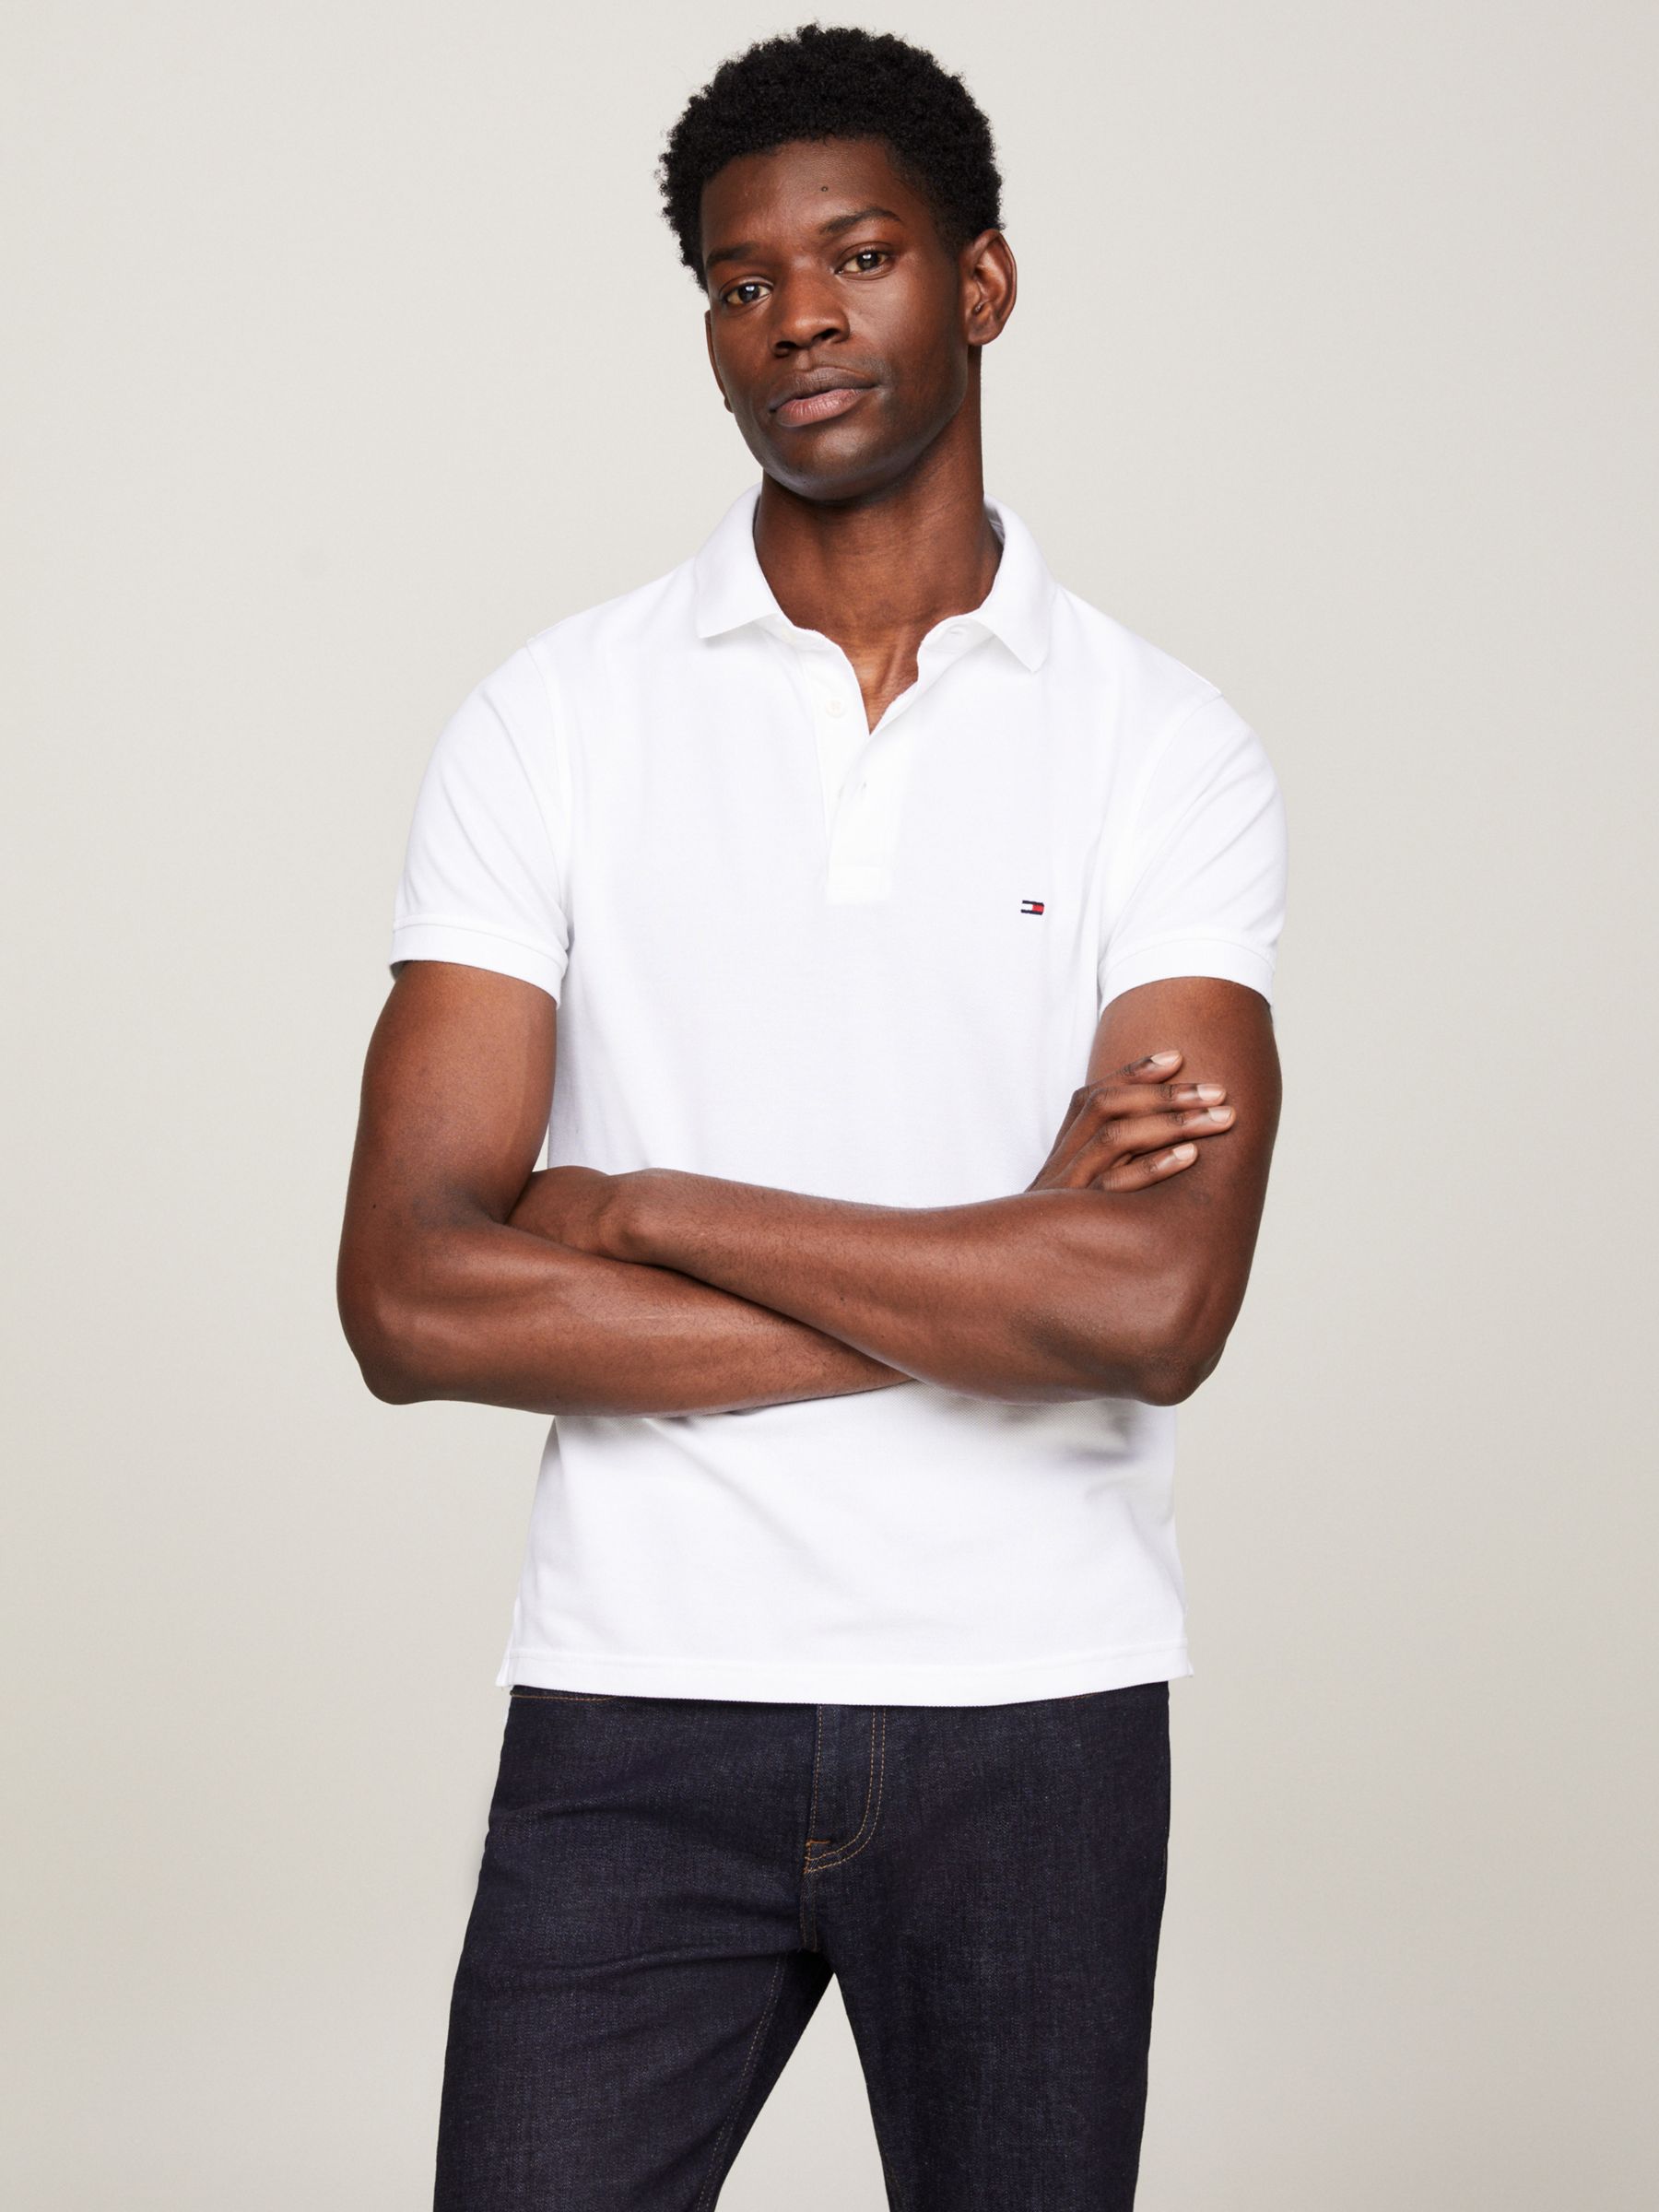 bue suppe hale Tommy Hilfiger Polo Shirt Classic White | craft-ivf.com